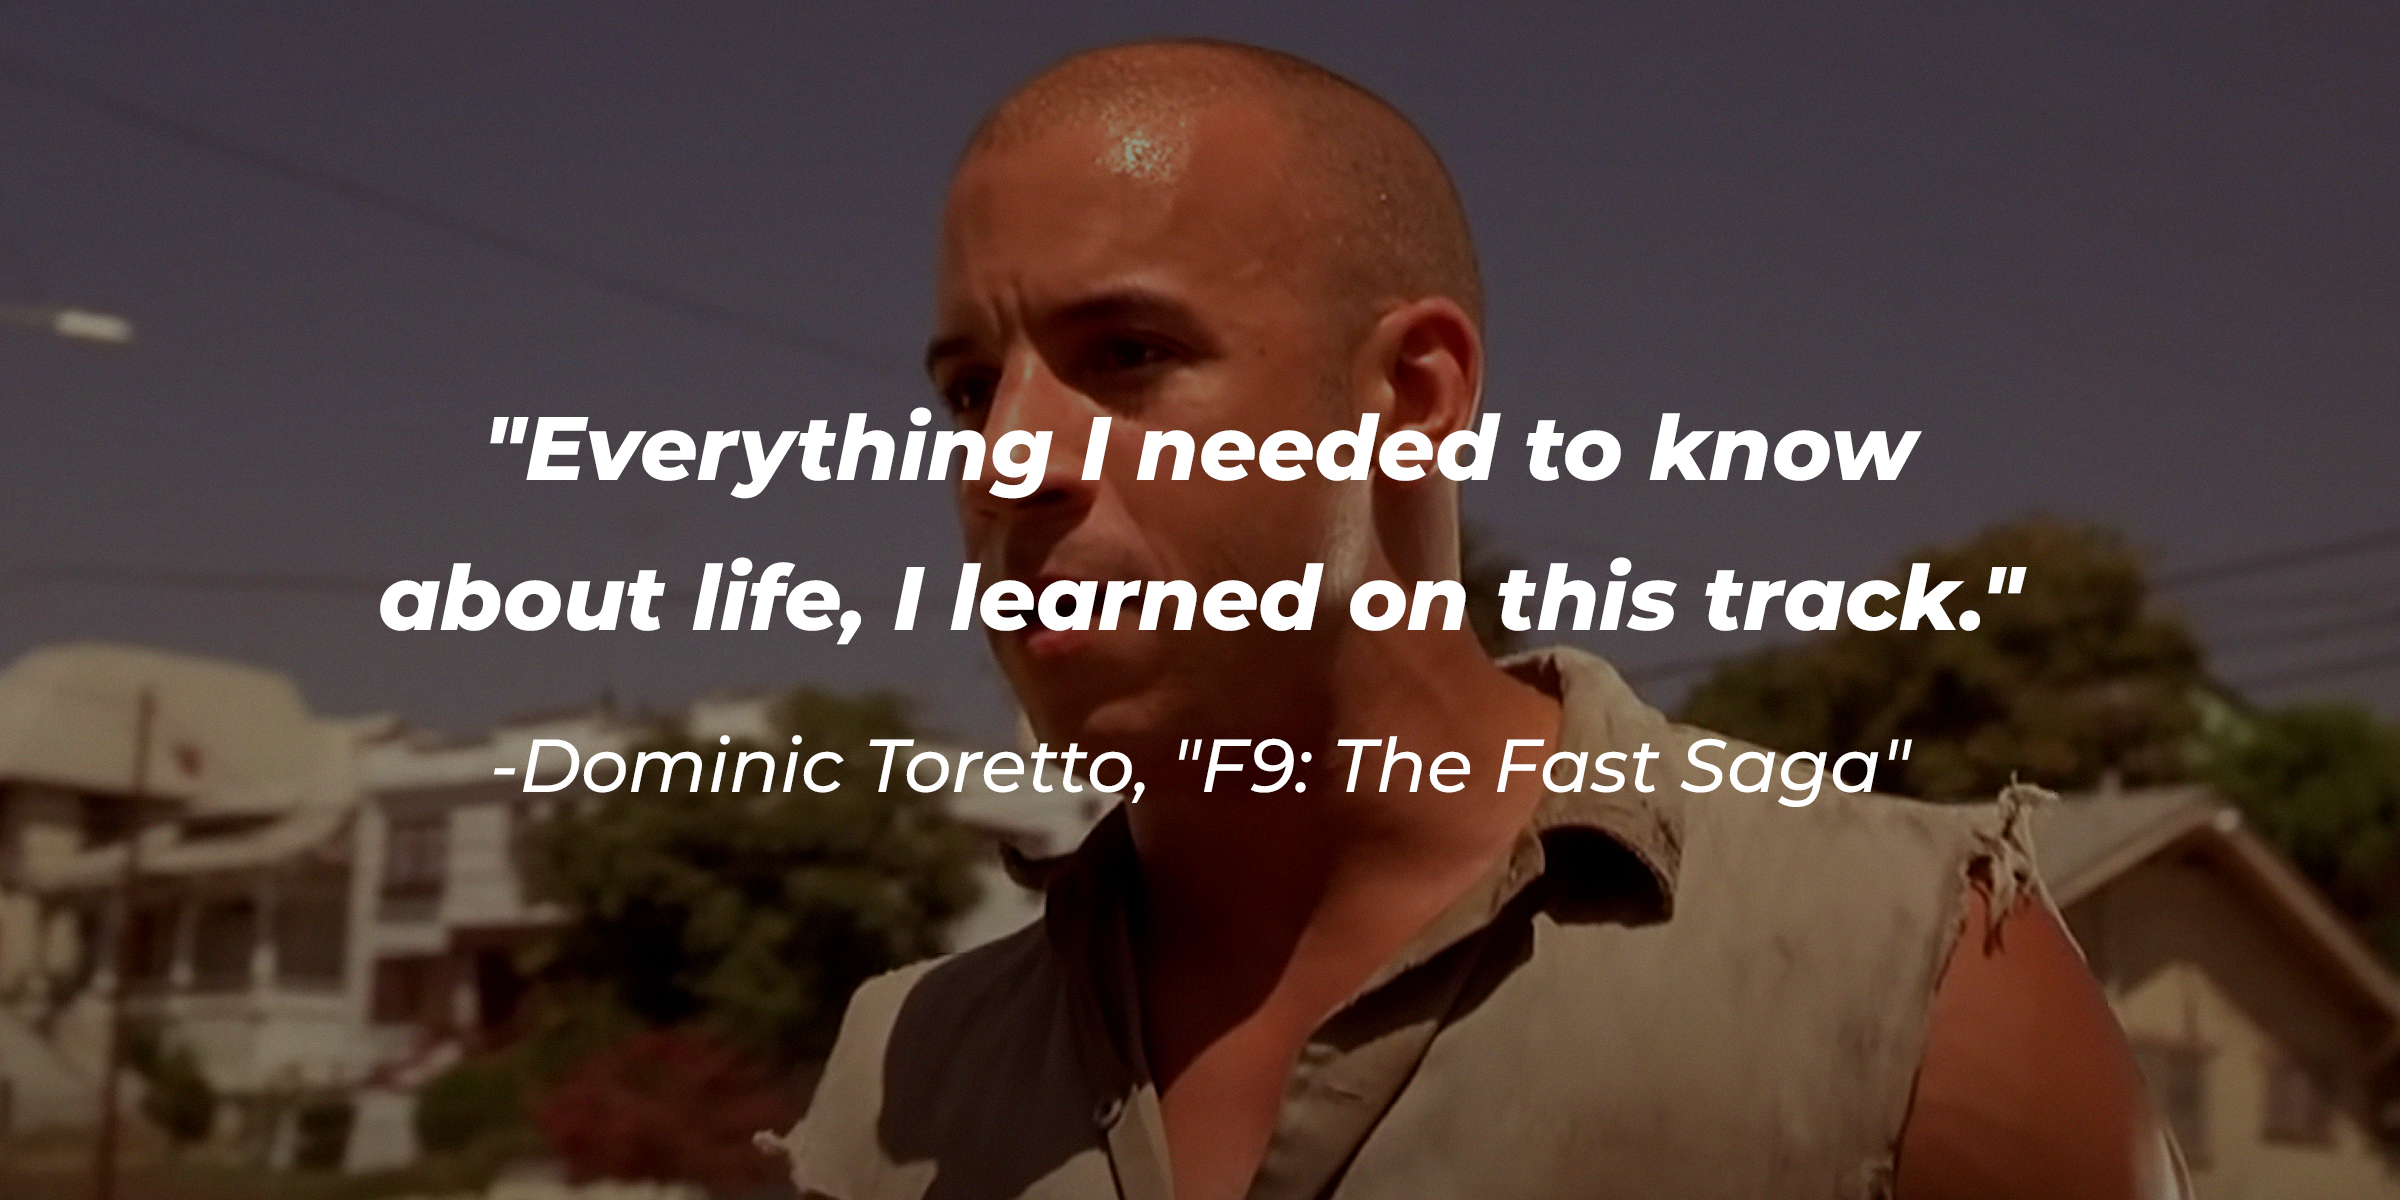 Dominic Toretto’s quote: "Everything I needed to know about life, I learned on this track." | Source: Facebook.com/TheFastSaga